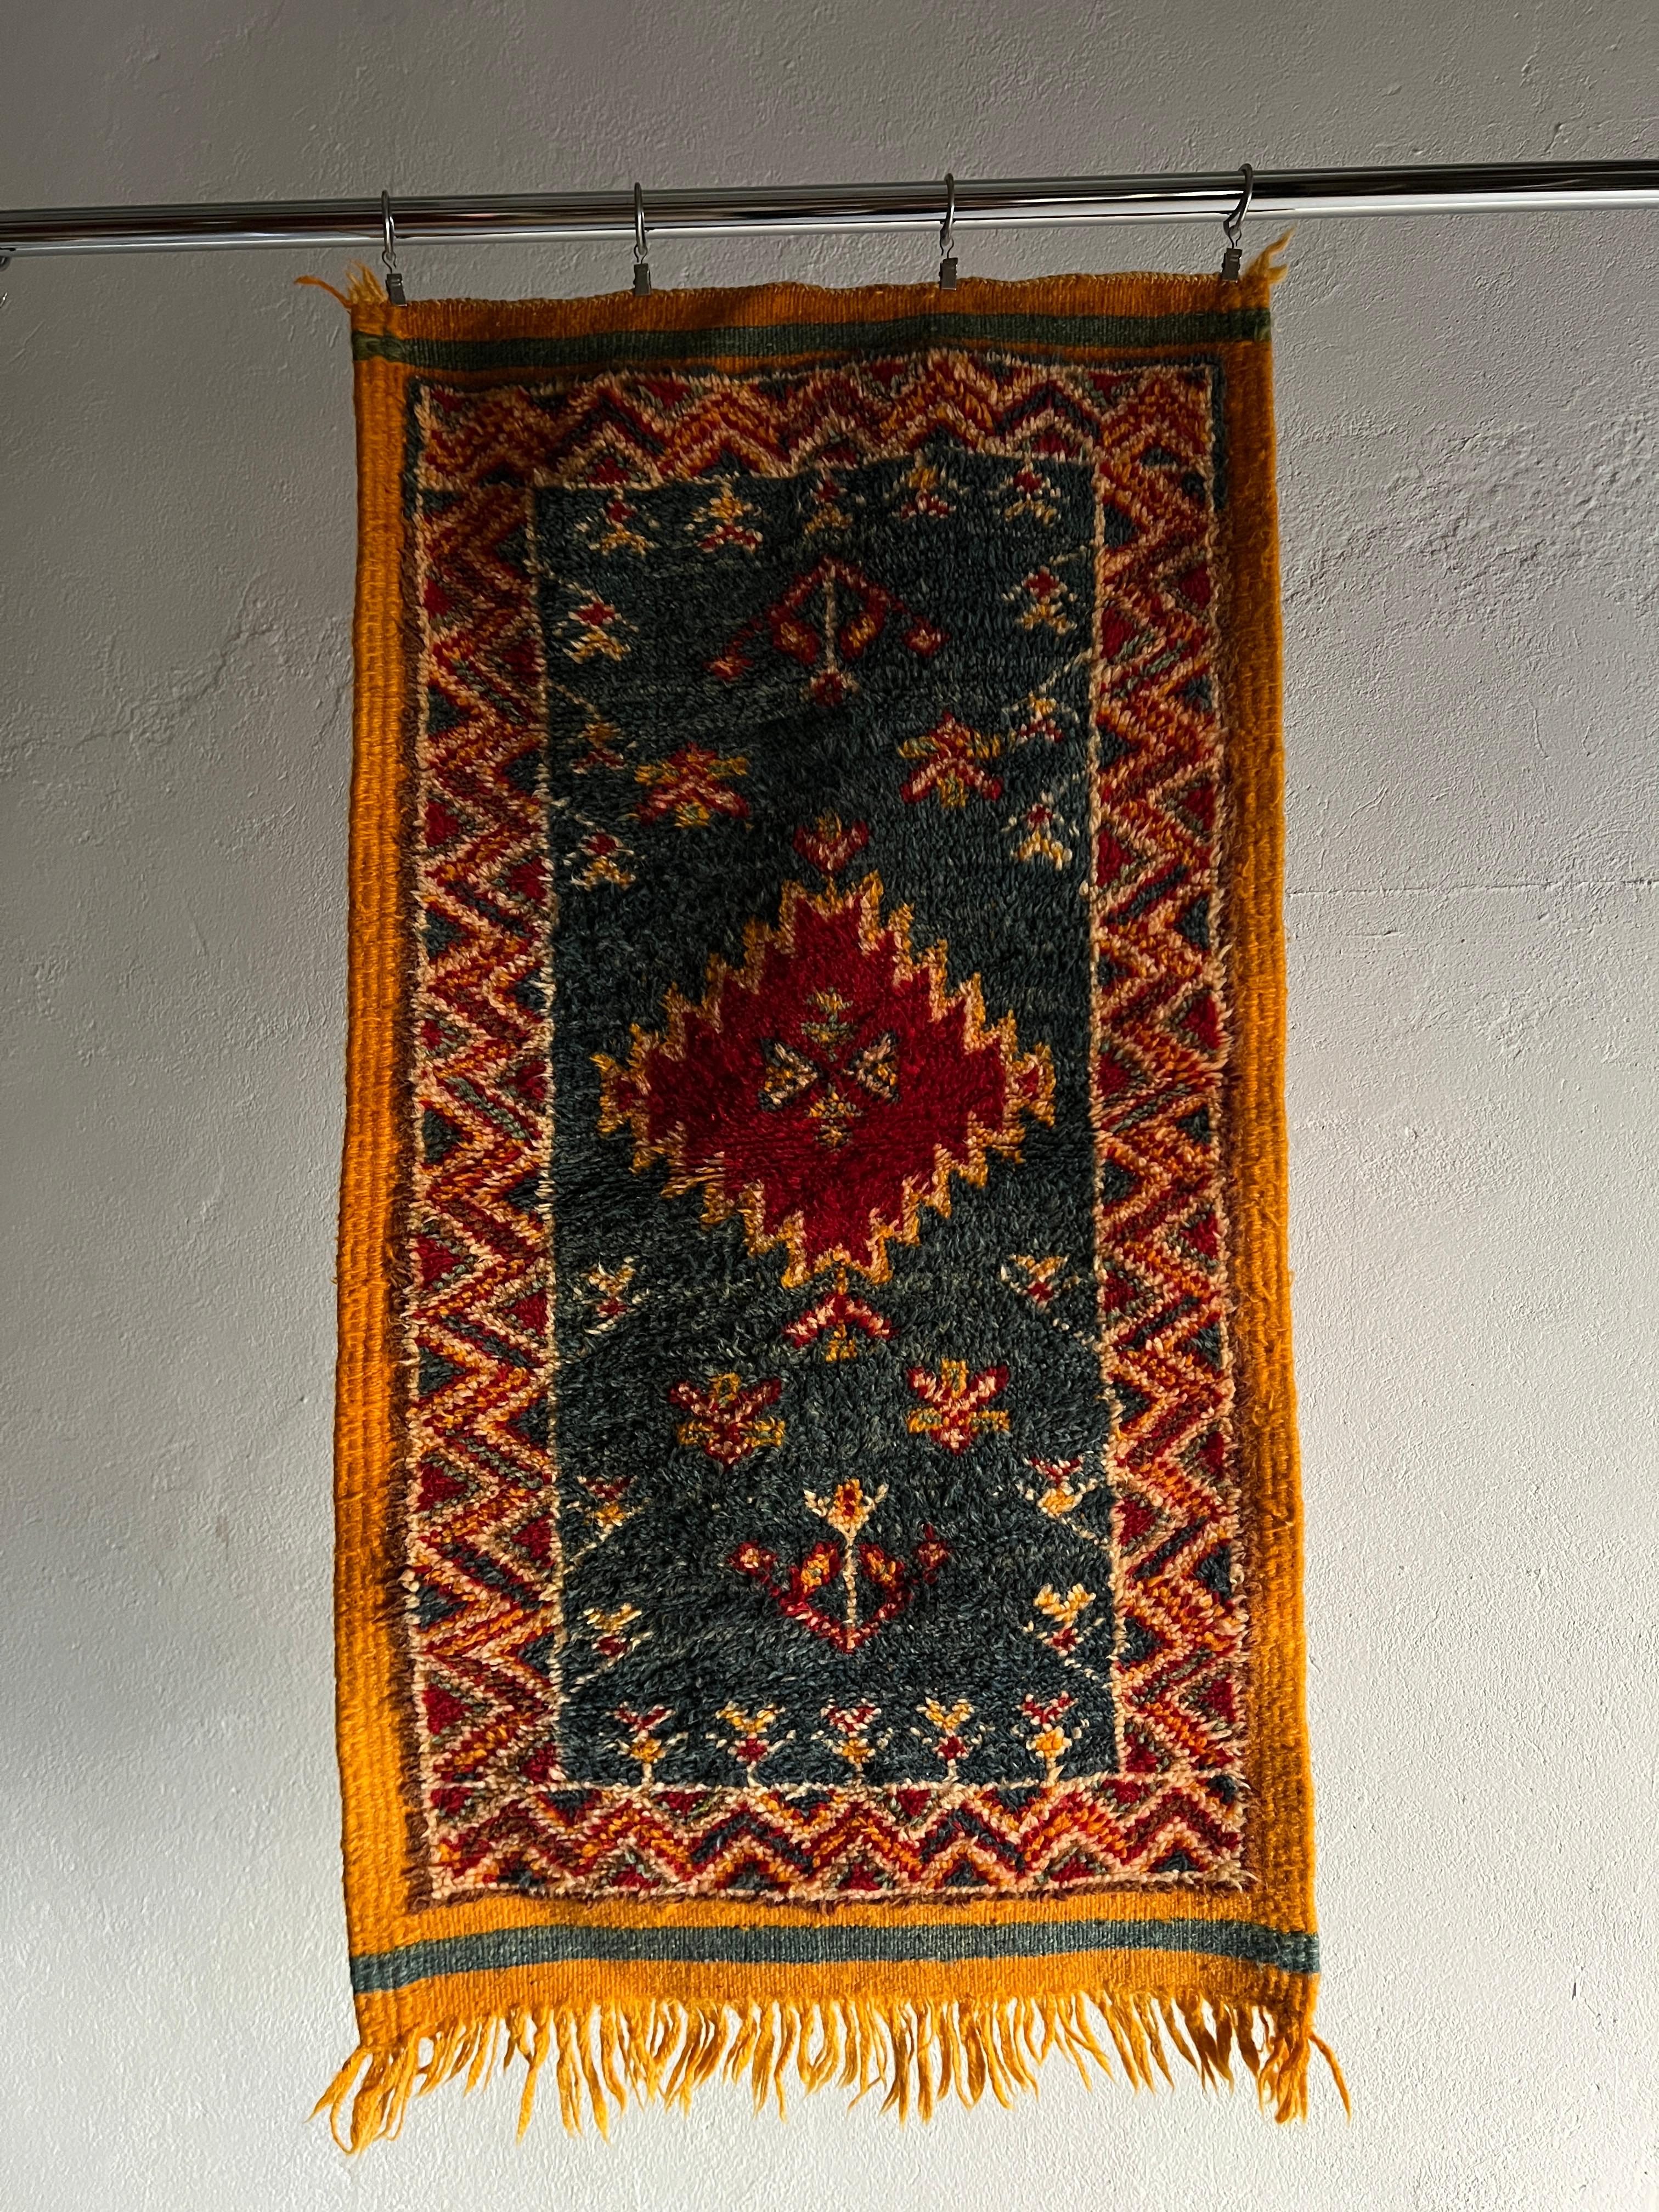 Vintage wool wall decoration carpet or a small rug but with a fringe on one side.

Additional information:
Origin: Sweden
Period: 1960s
Dimensions: W 53 cm x D 105 cm
Condition: Goodvintage condition